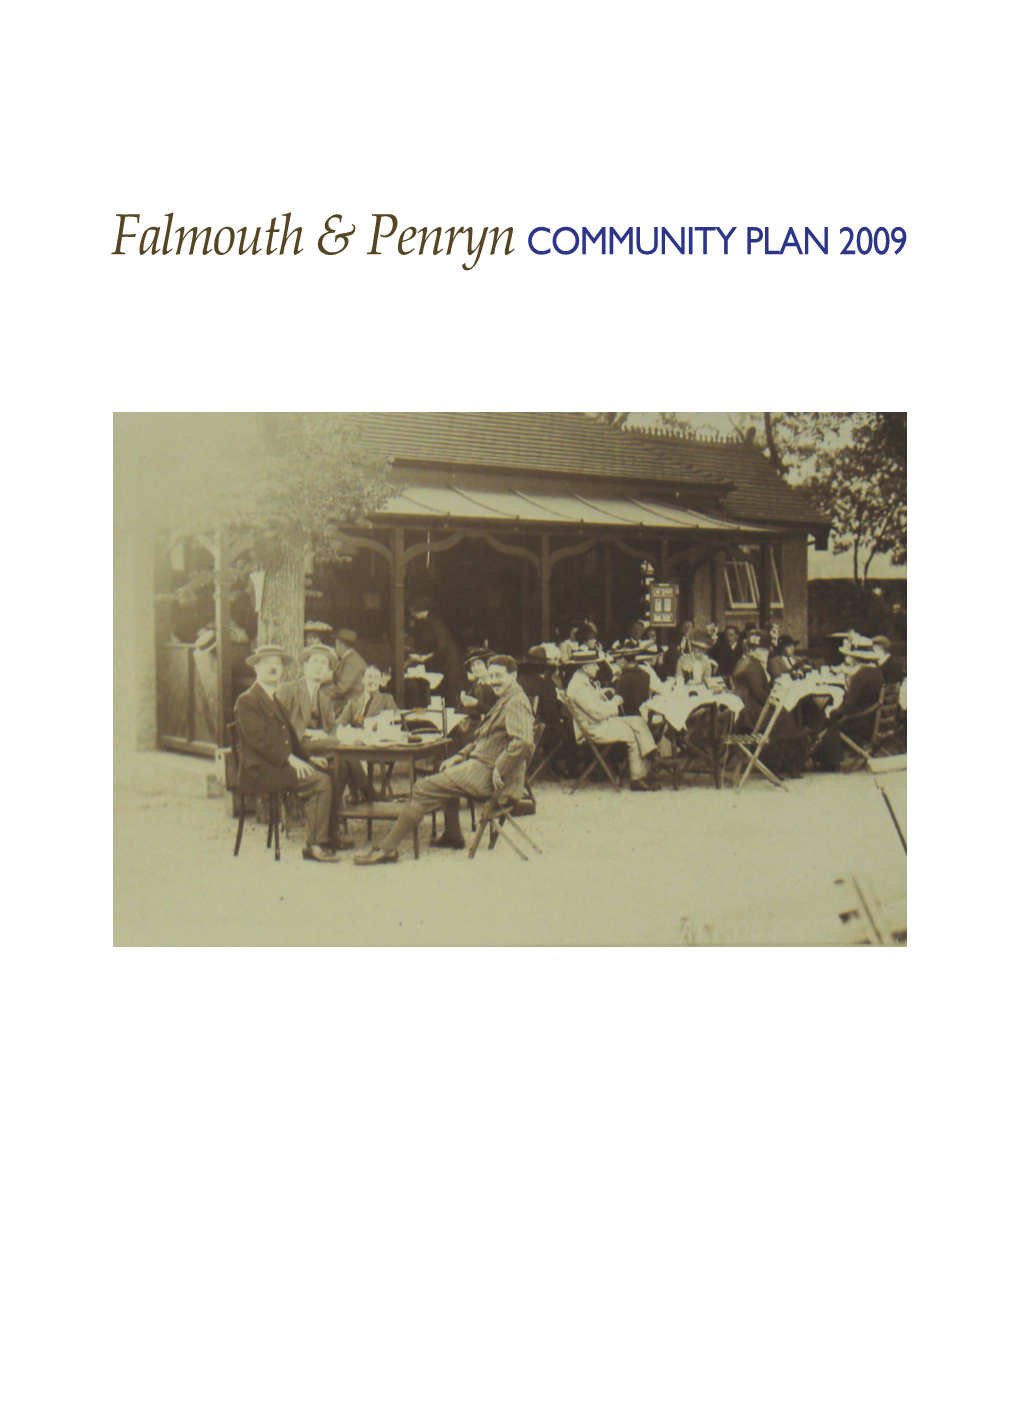 Falmouth and Penryn Community Plan Design and Production by Ray Tovey Telephone 01736 850513/ 07926 095418 E-Mail Ray@Cornishquest.Freeserve.Co.Uk